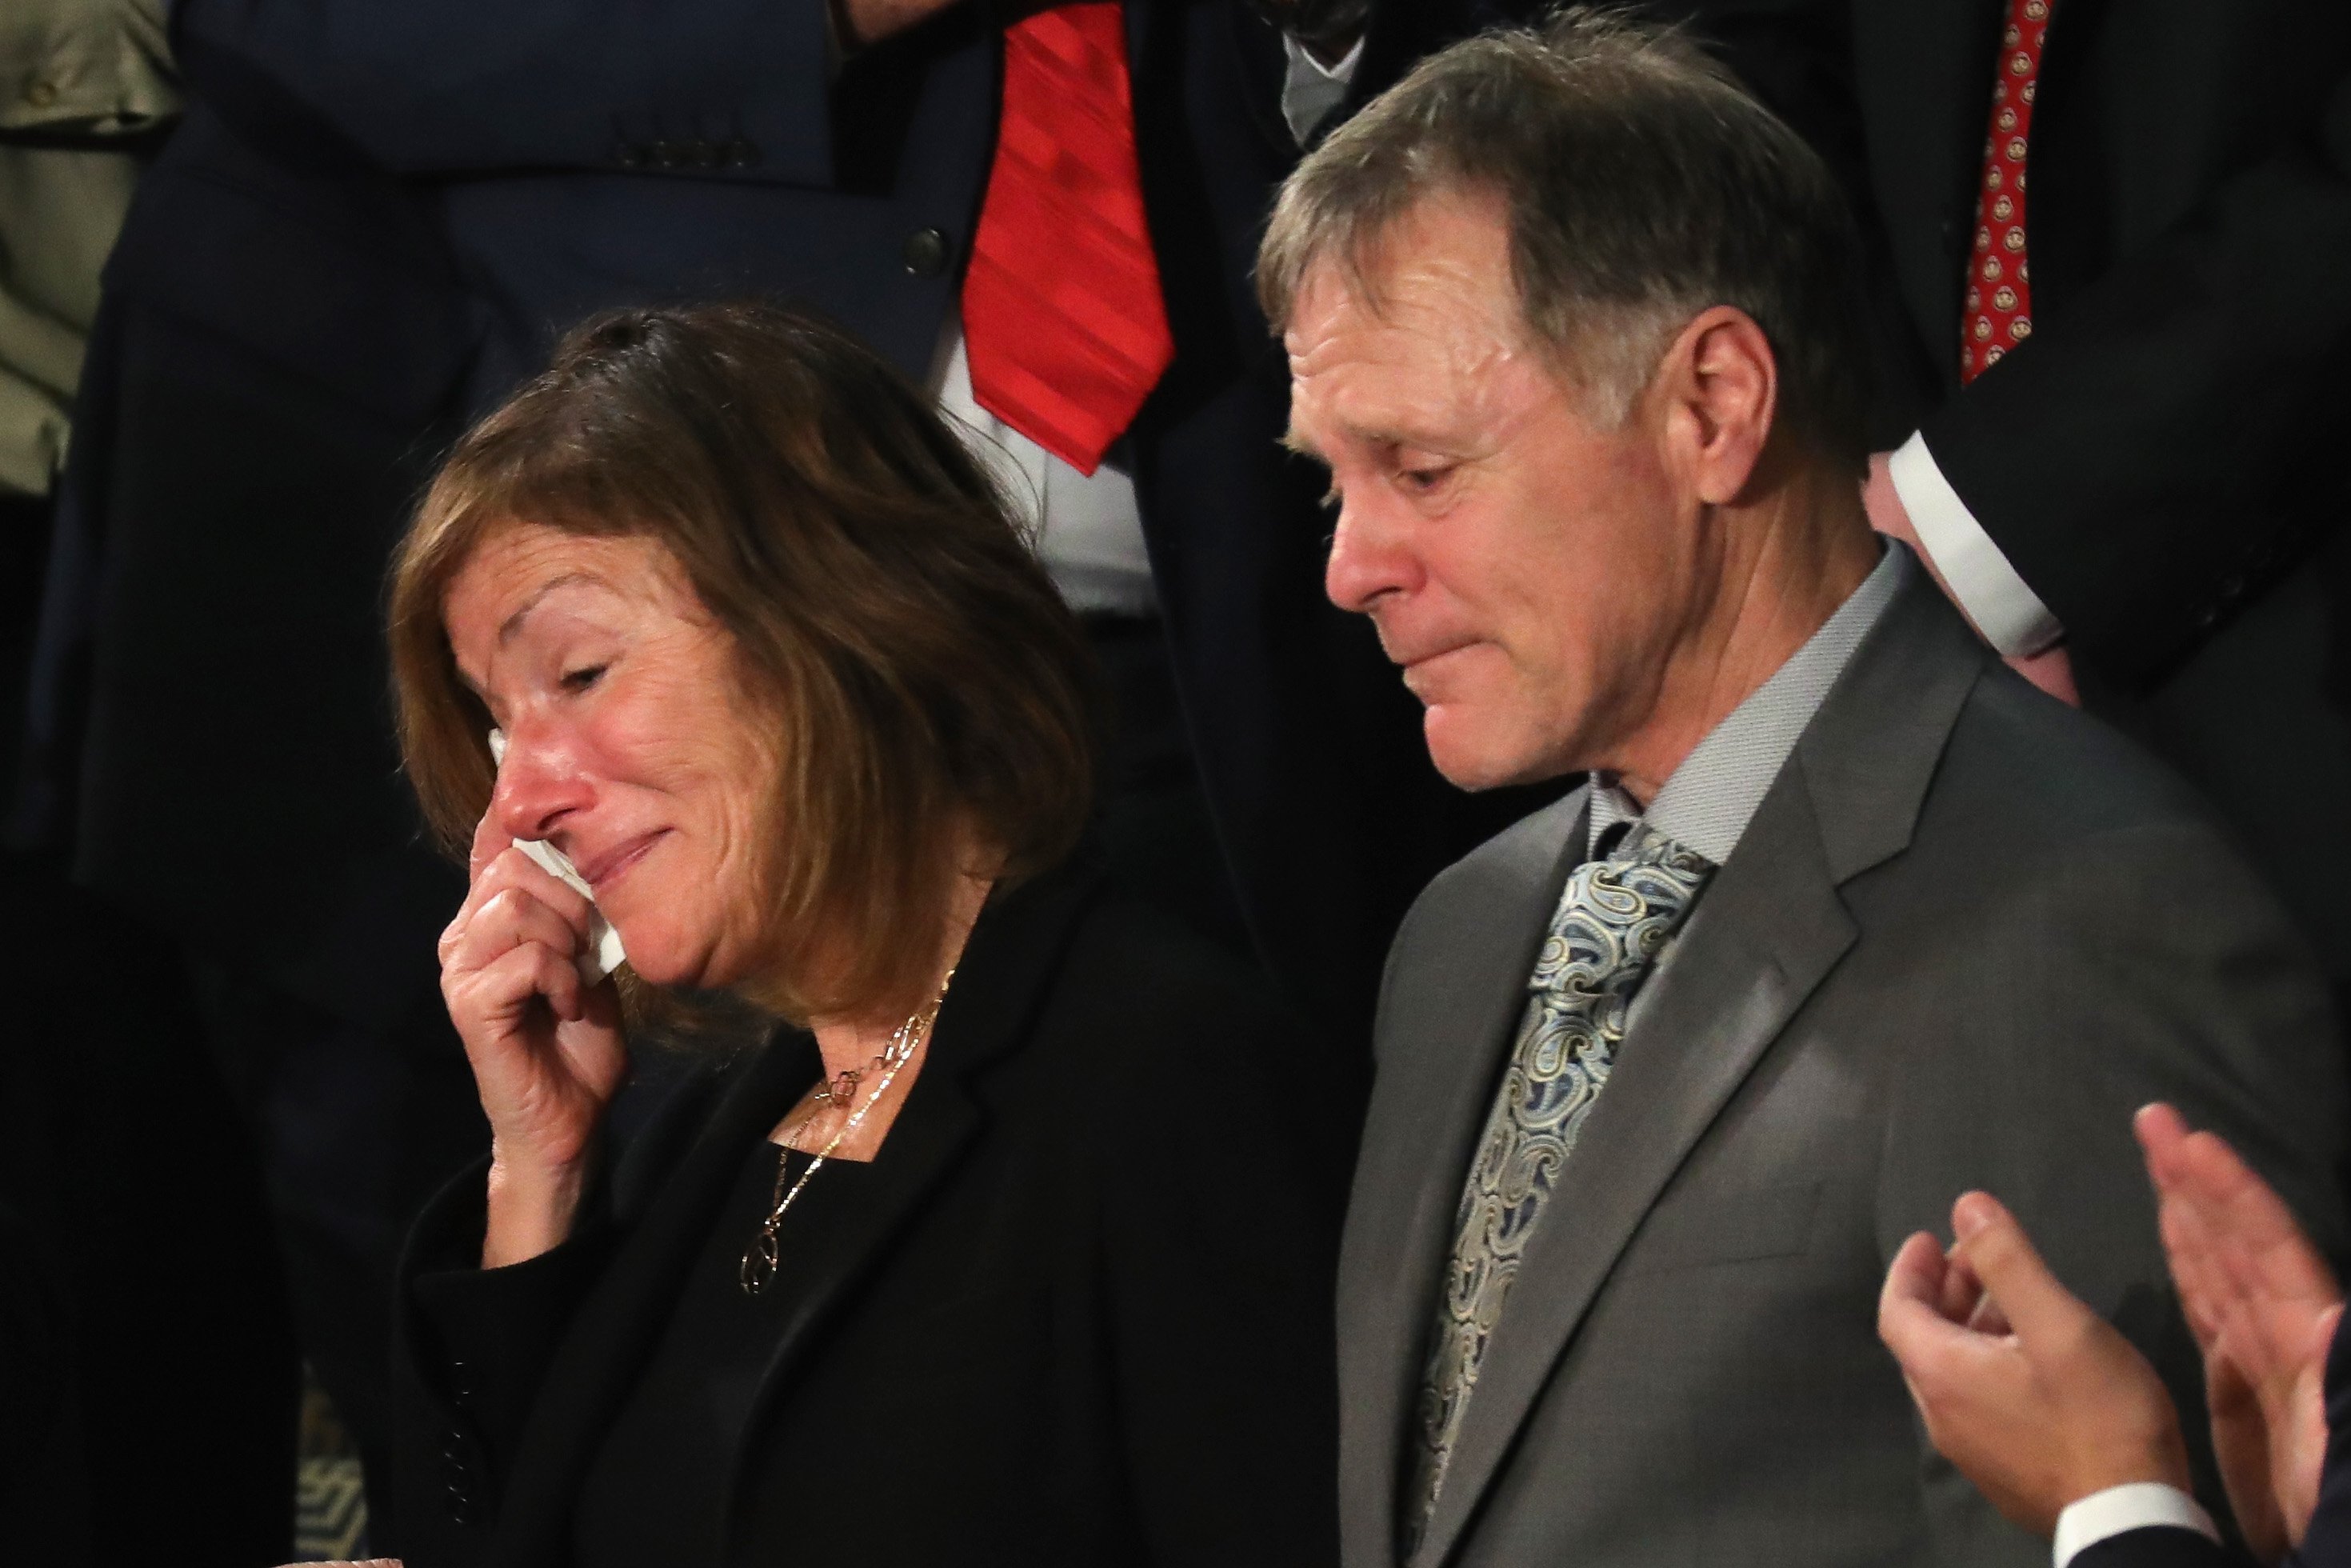  Parents of Otto Warmbier, Fred and Cindy Warmbier | Source: Getty Images